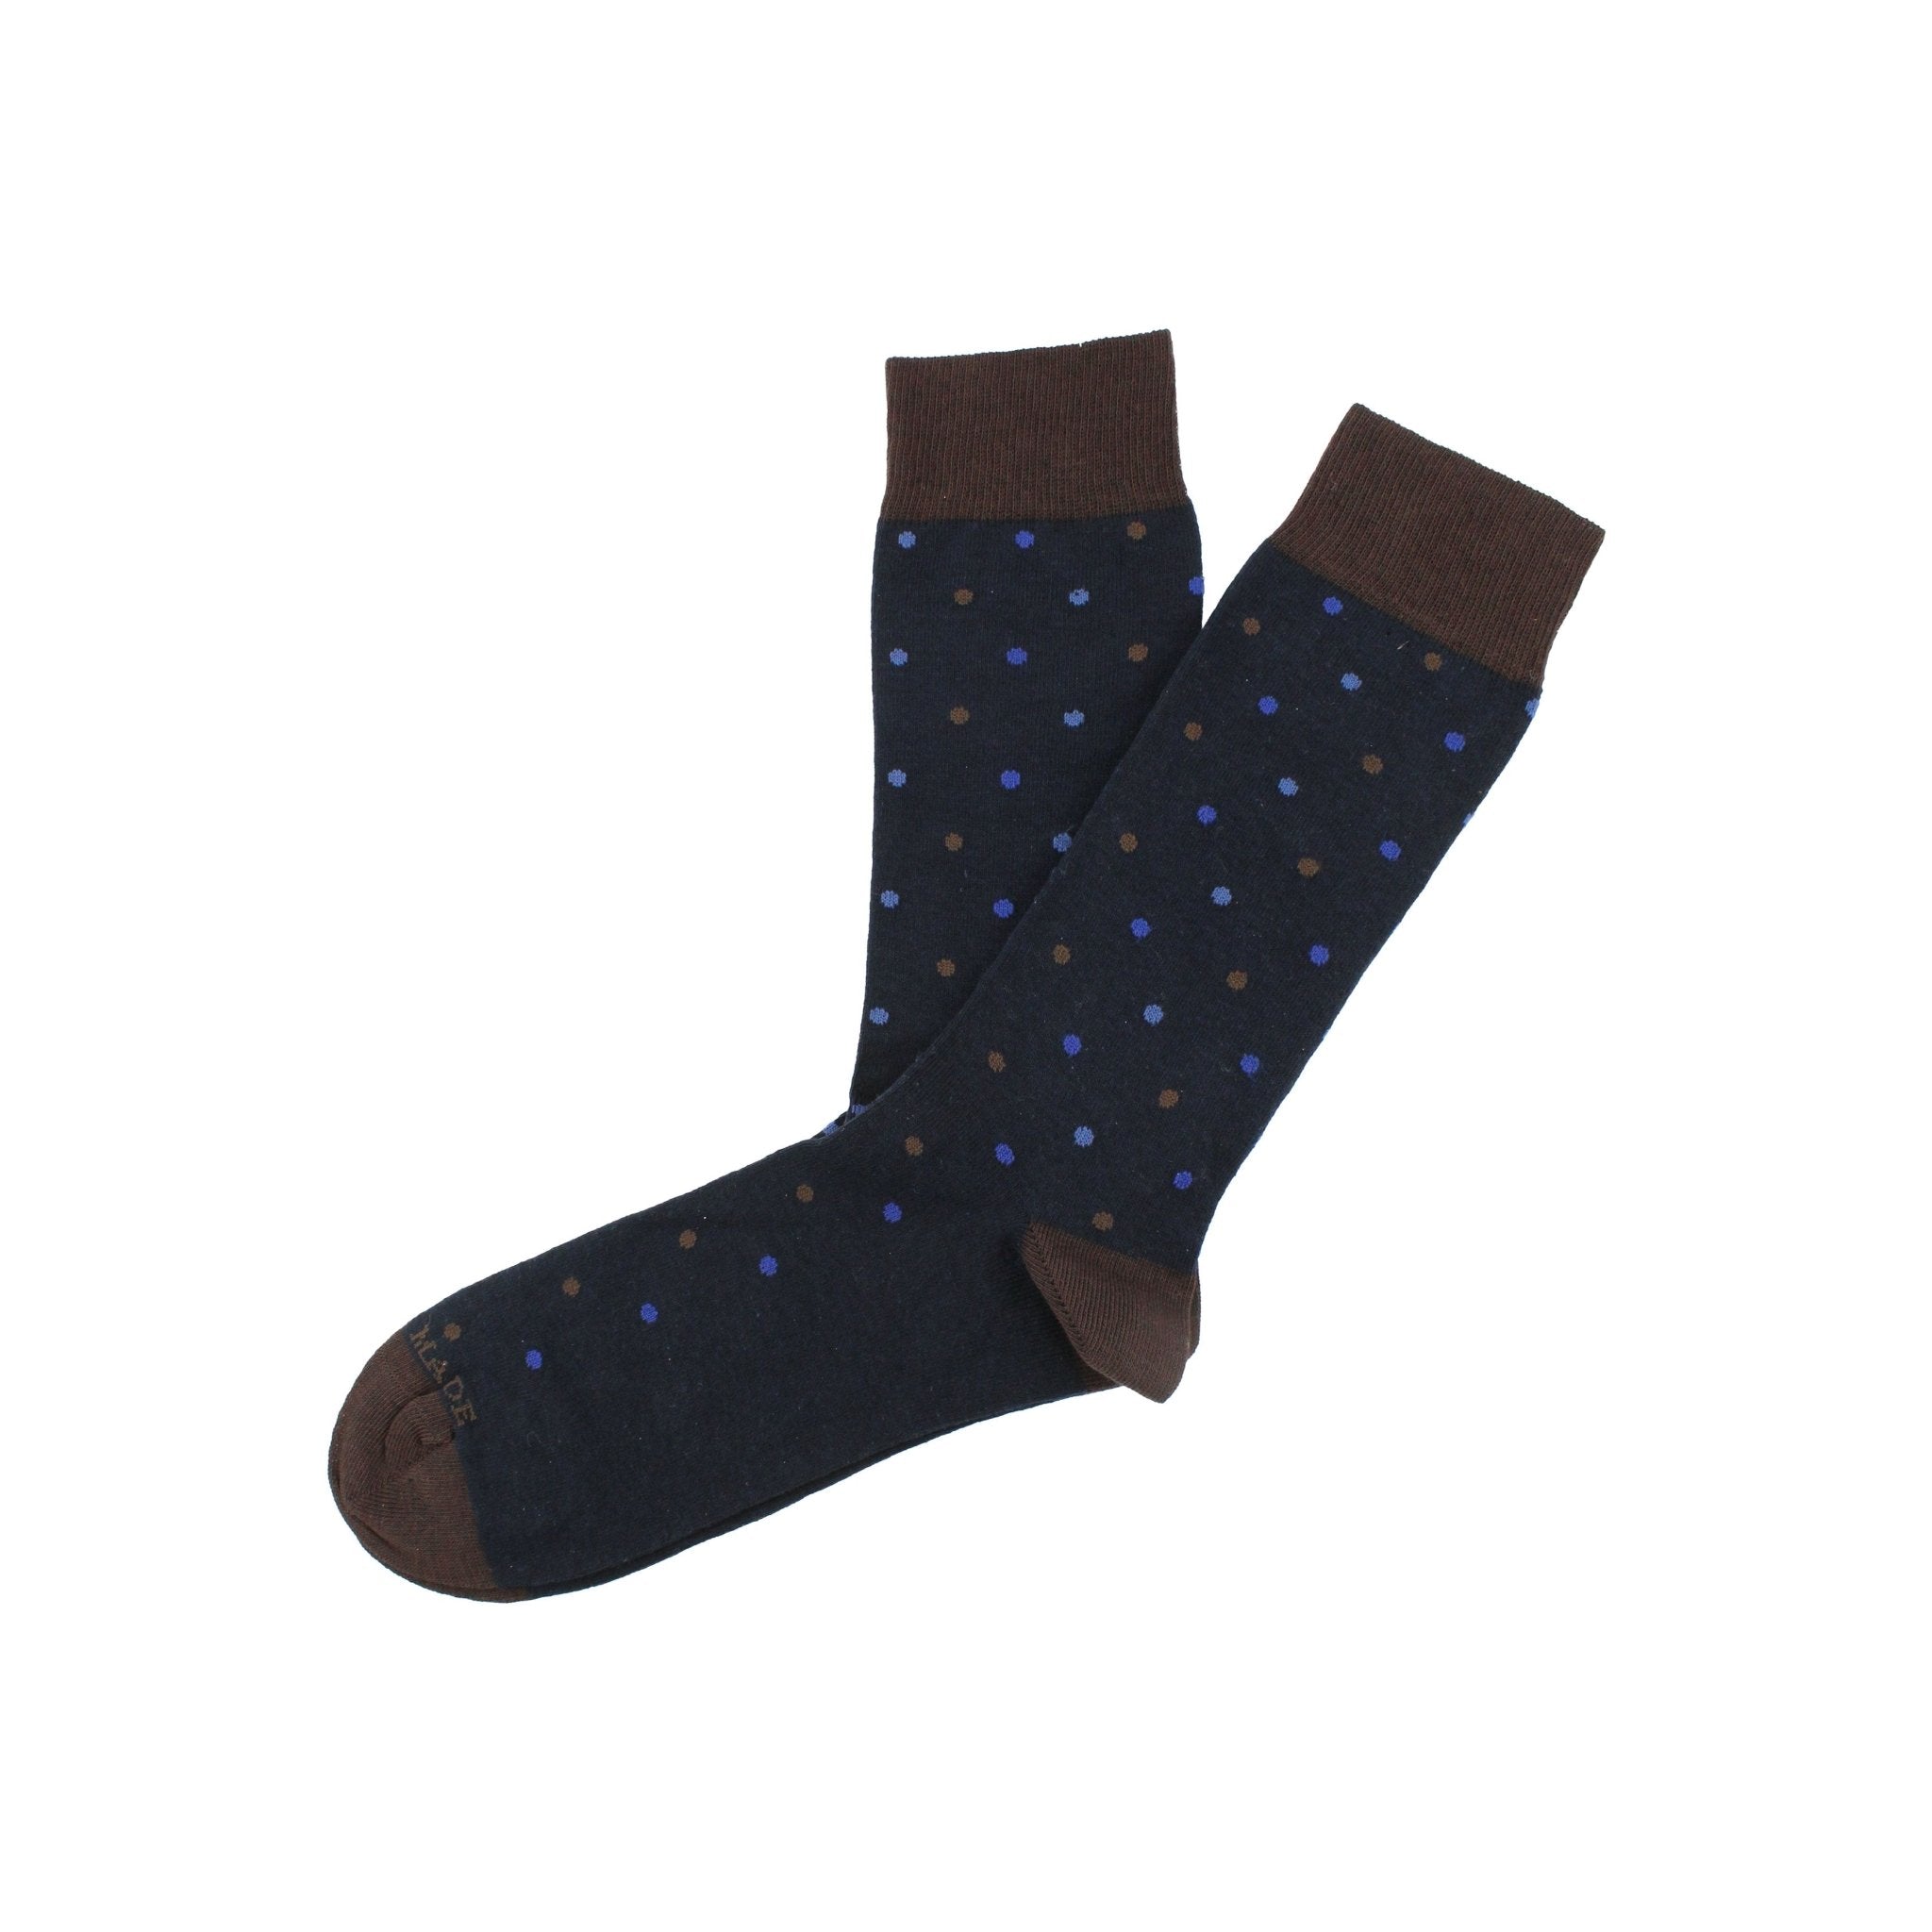 Colorful Men's Socks & Accessories – Hammer Made